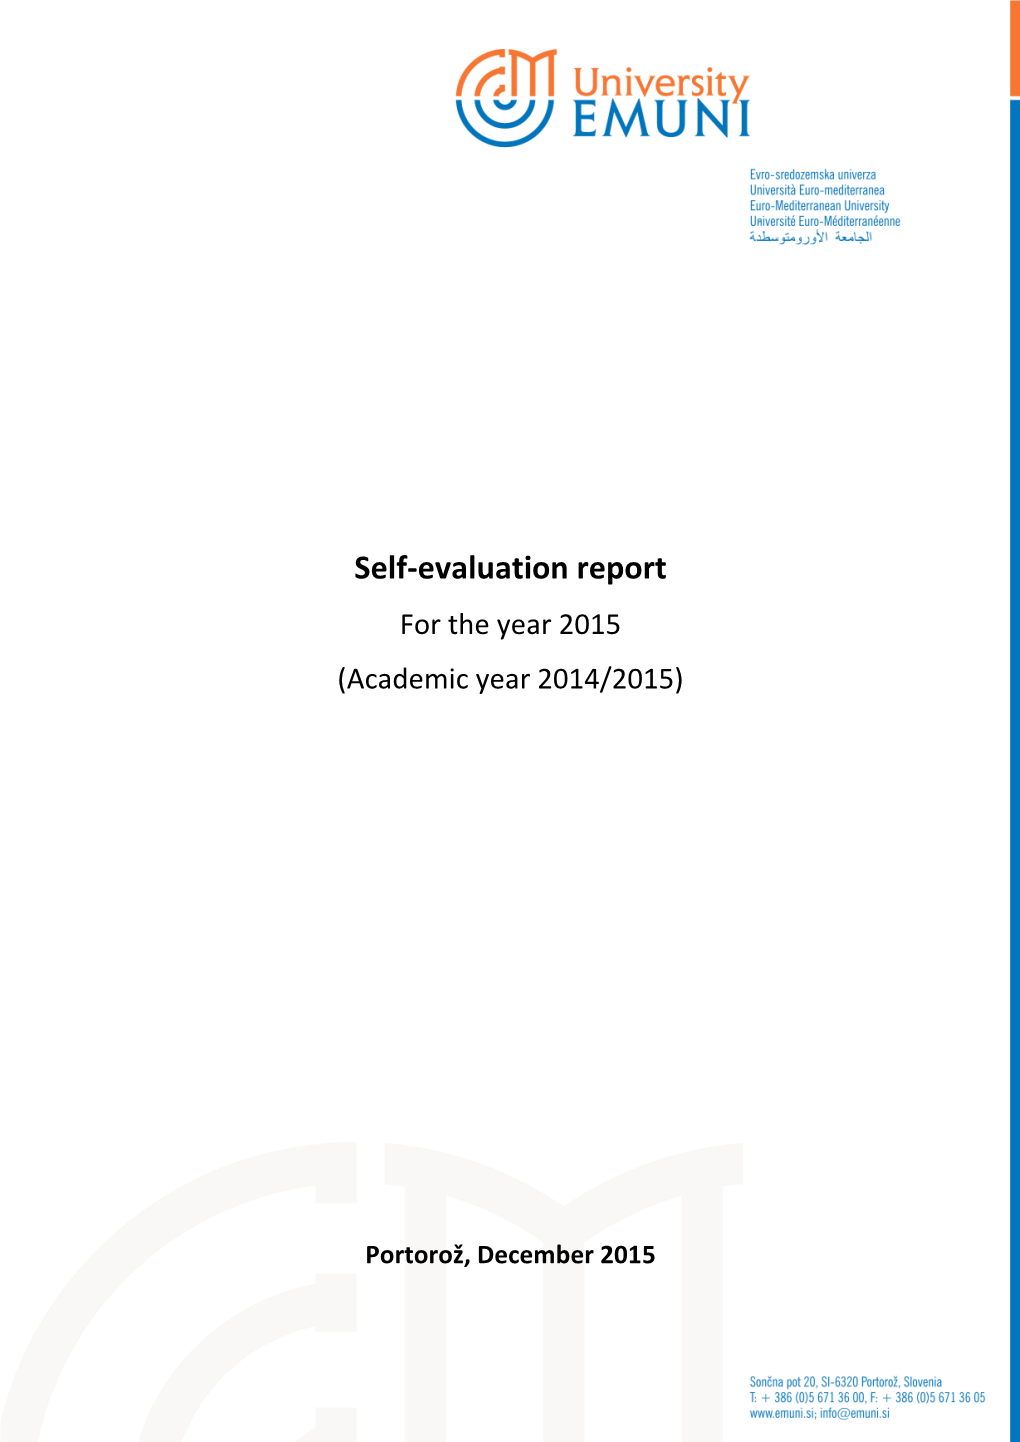 Self-Evaluation Report for the Year 2015 (Academic Year 2014/2015)